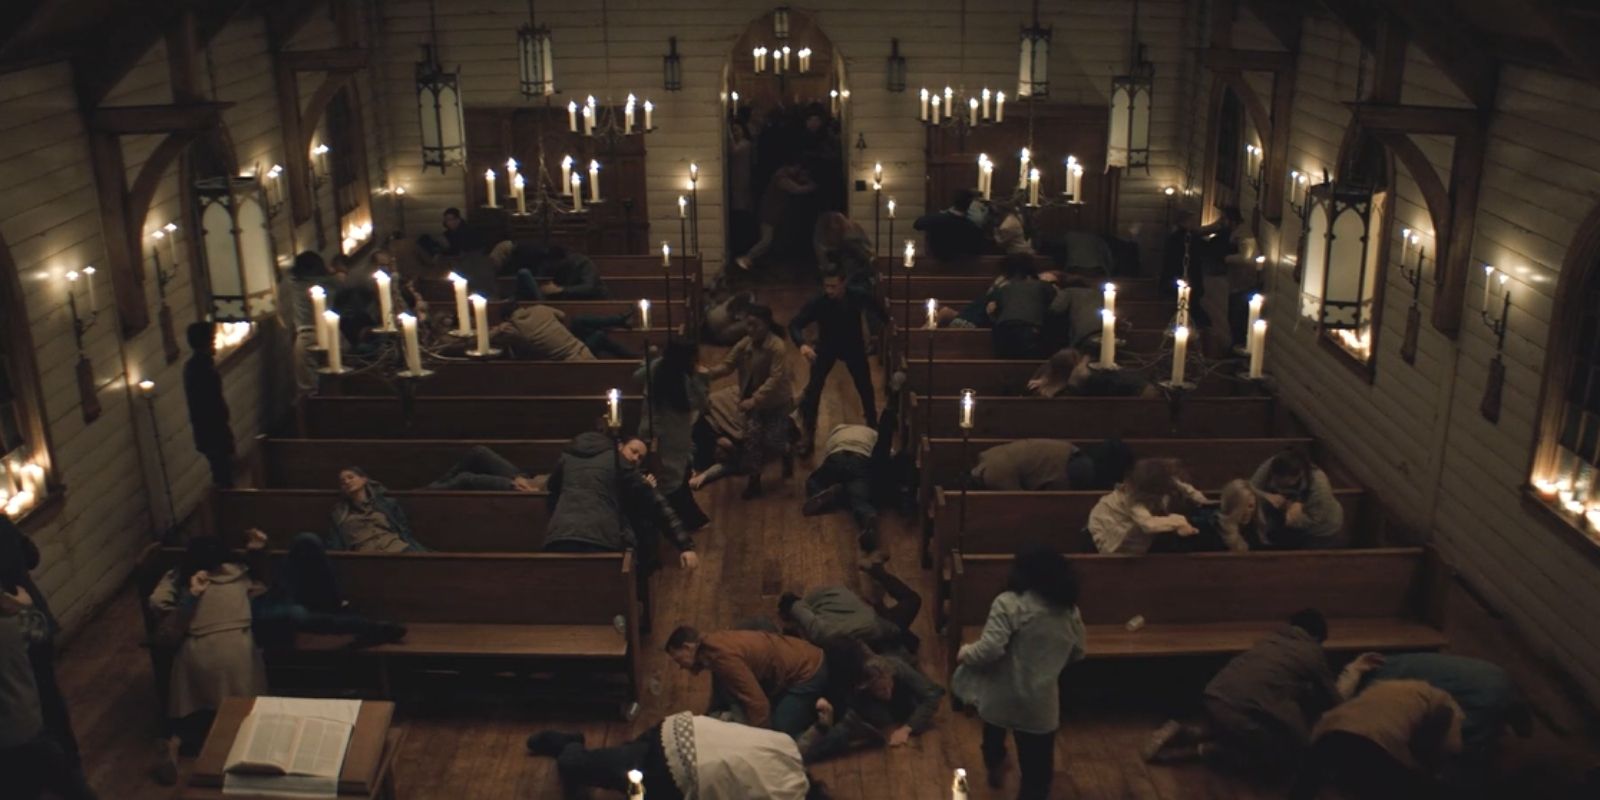 The parishioners of St Patrick's Church turn into vampires and attack each other in Midnight Mass.